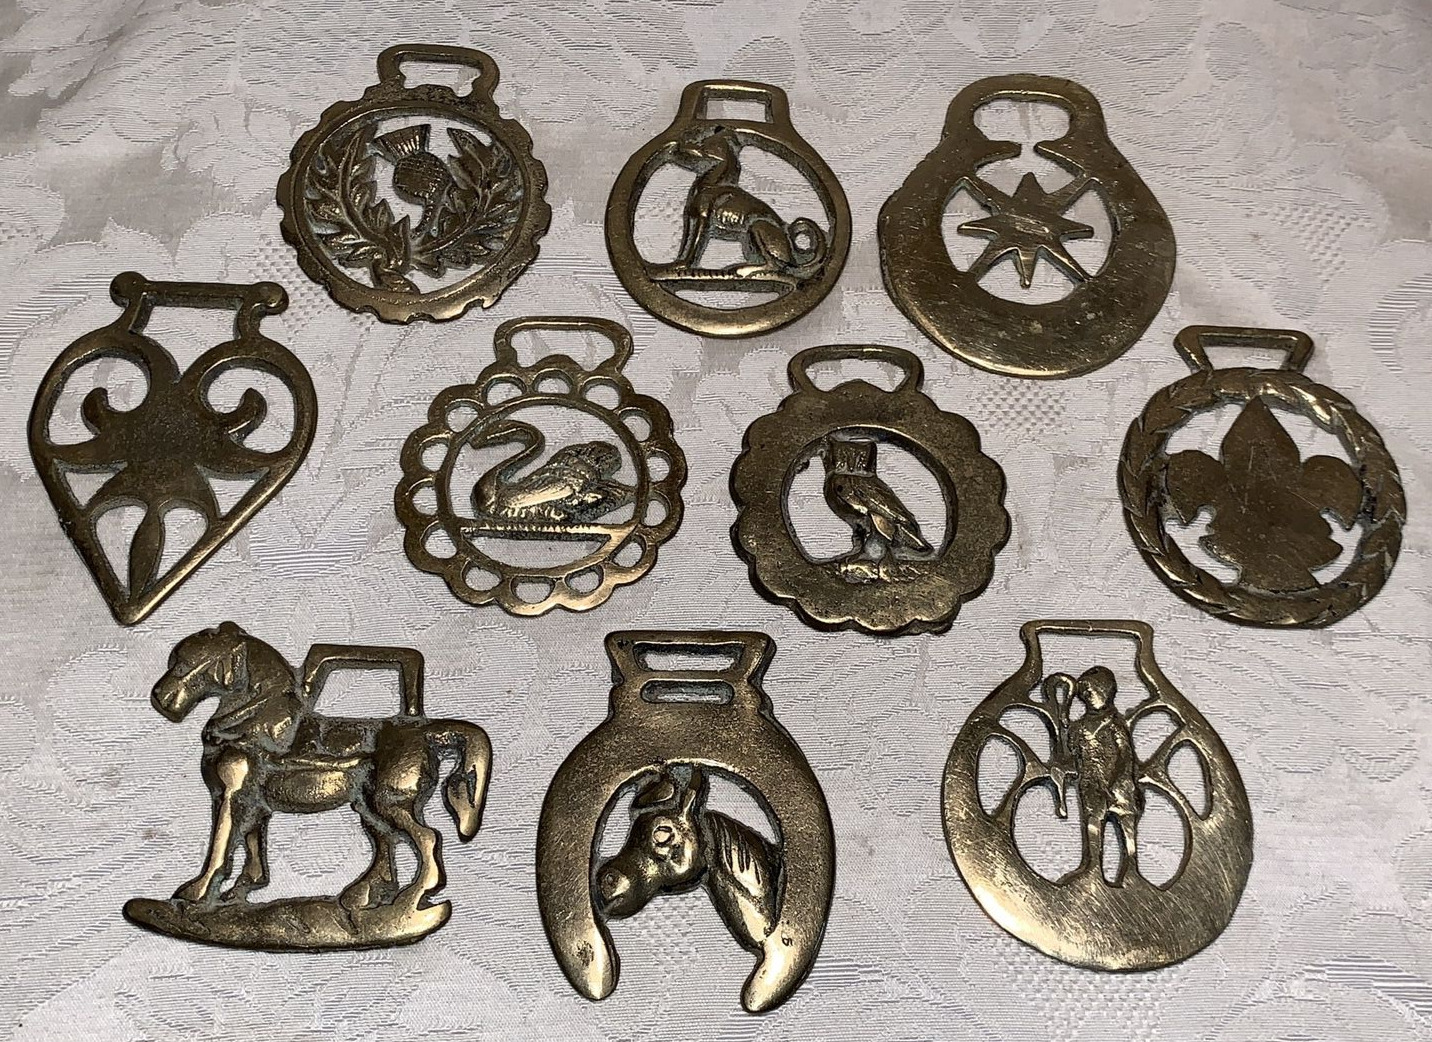 Lot of 10 Vintage English Brass Horse Bridle Medallions - All Different Designs